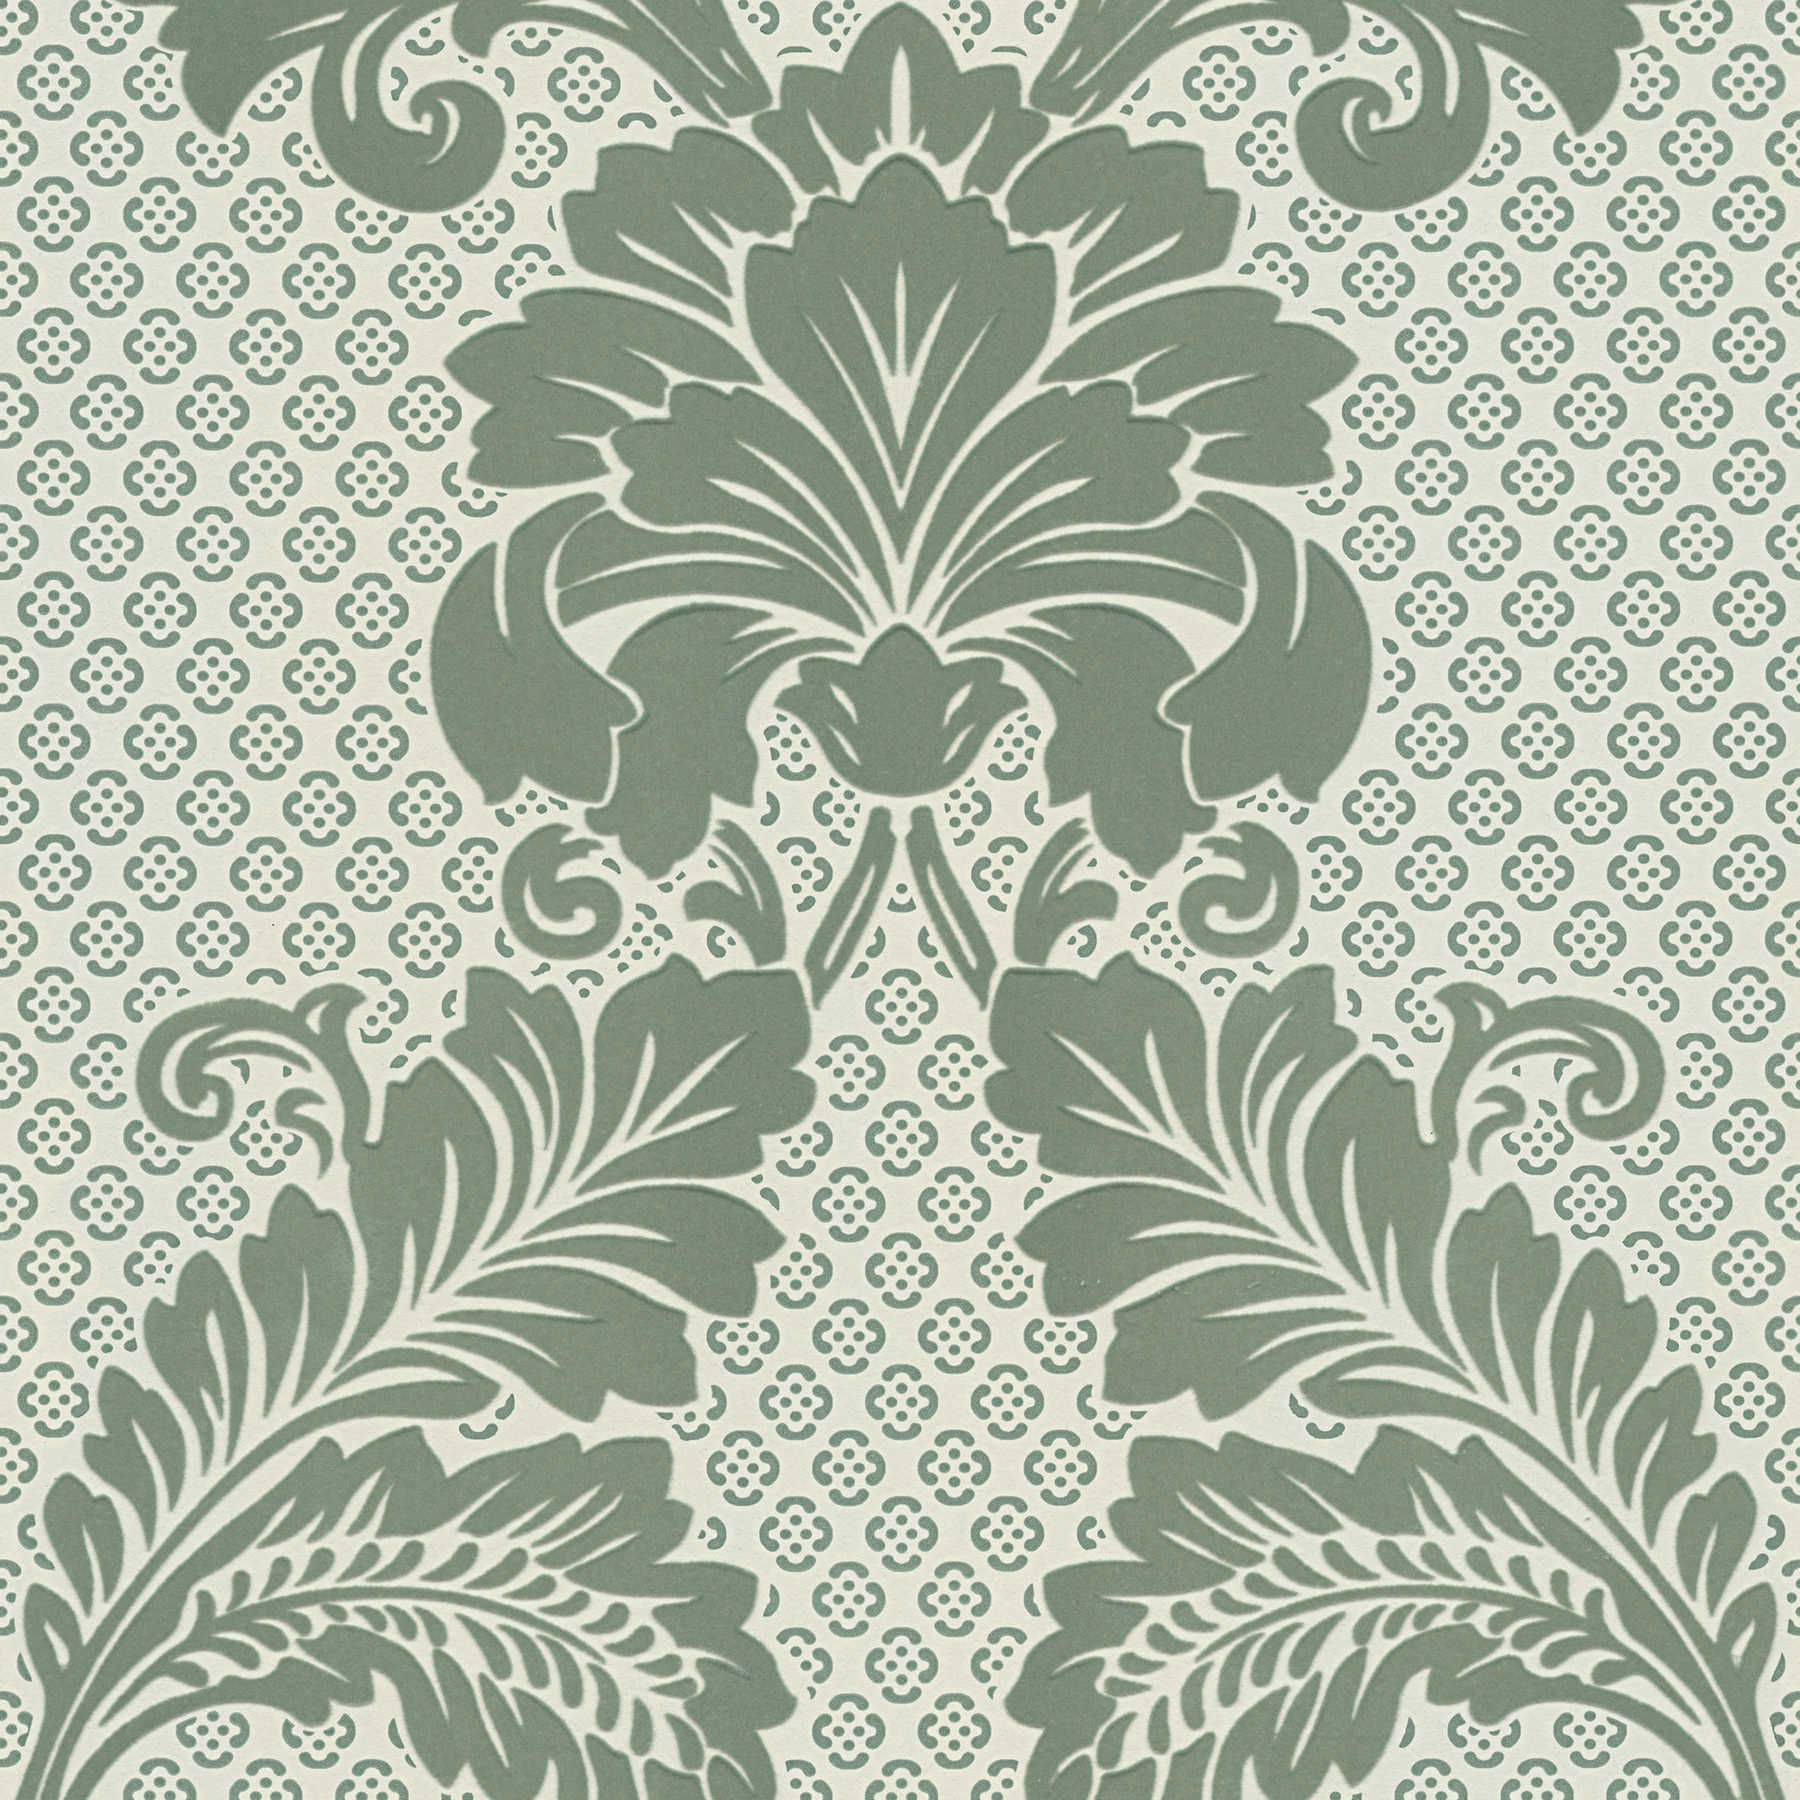         Patterned ornamental wallpaper with large floral motif - green, blue
    